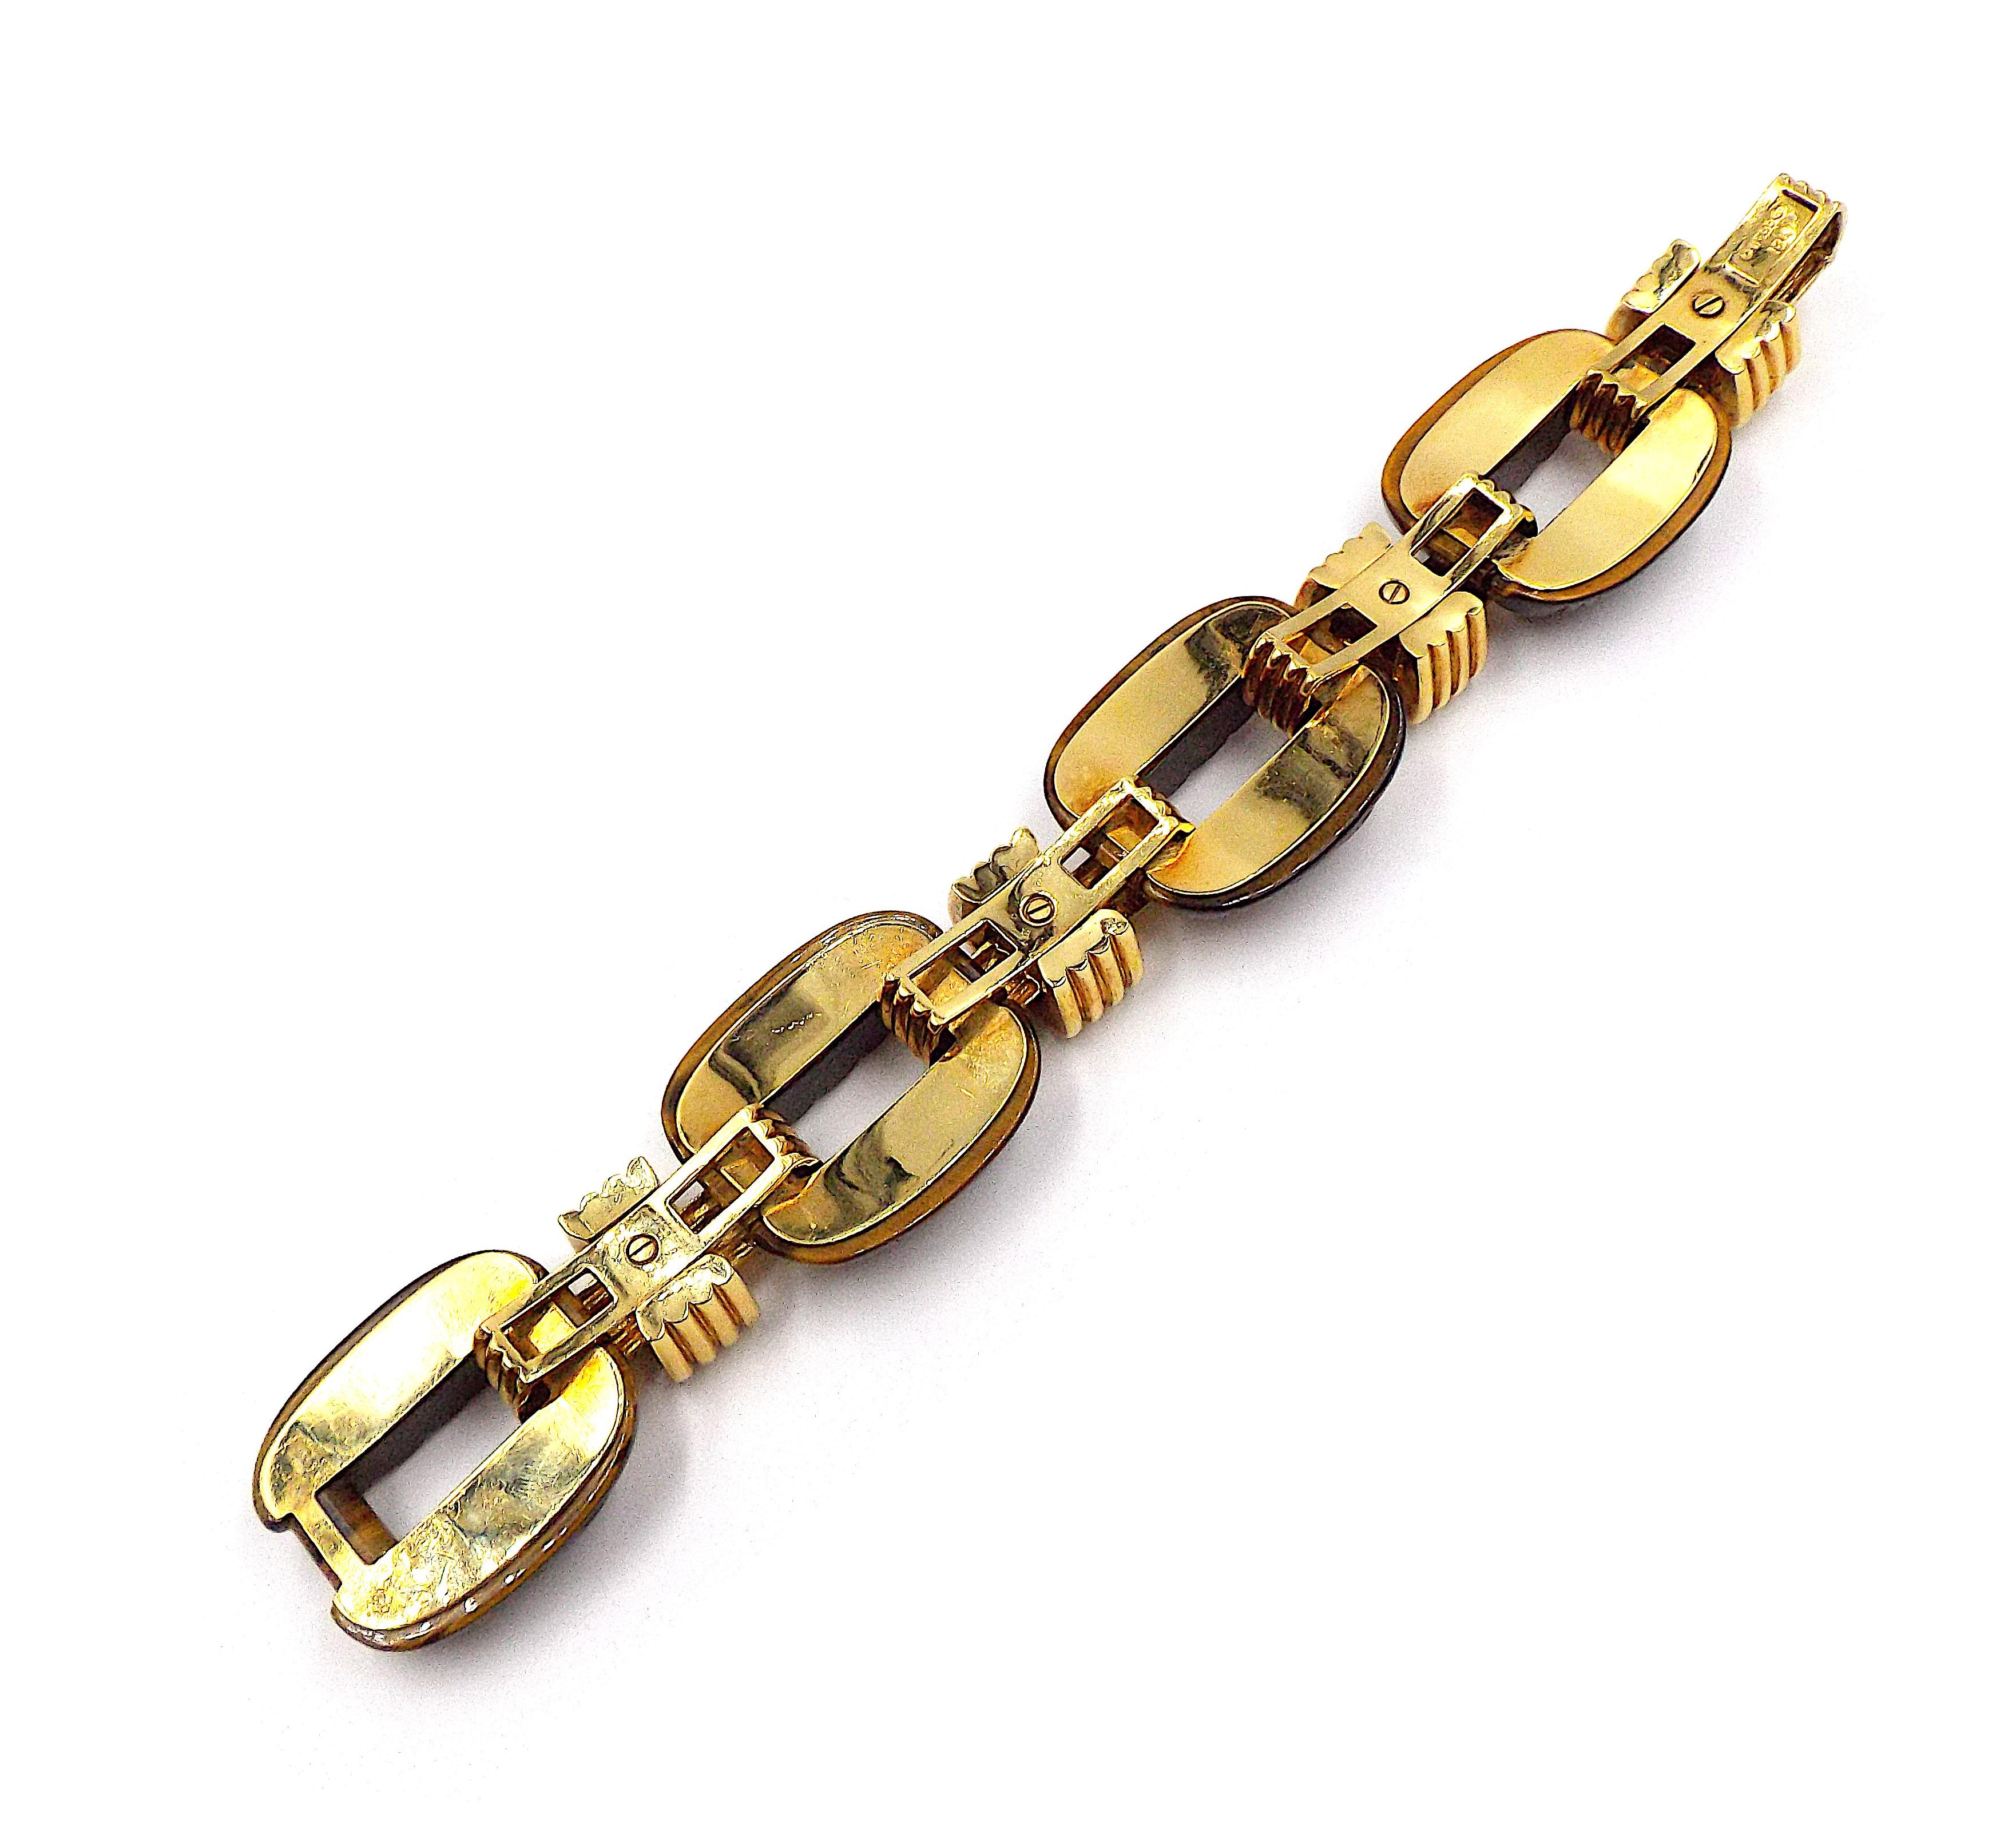 A classic link bracelet by David Webb. 18K yellow gold featuring large carved tiger eye links. Signed Webb, marked 18K. Length is approximately 6.75 inches.